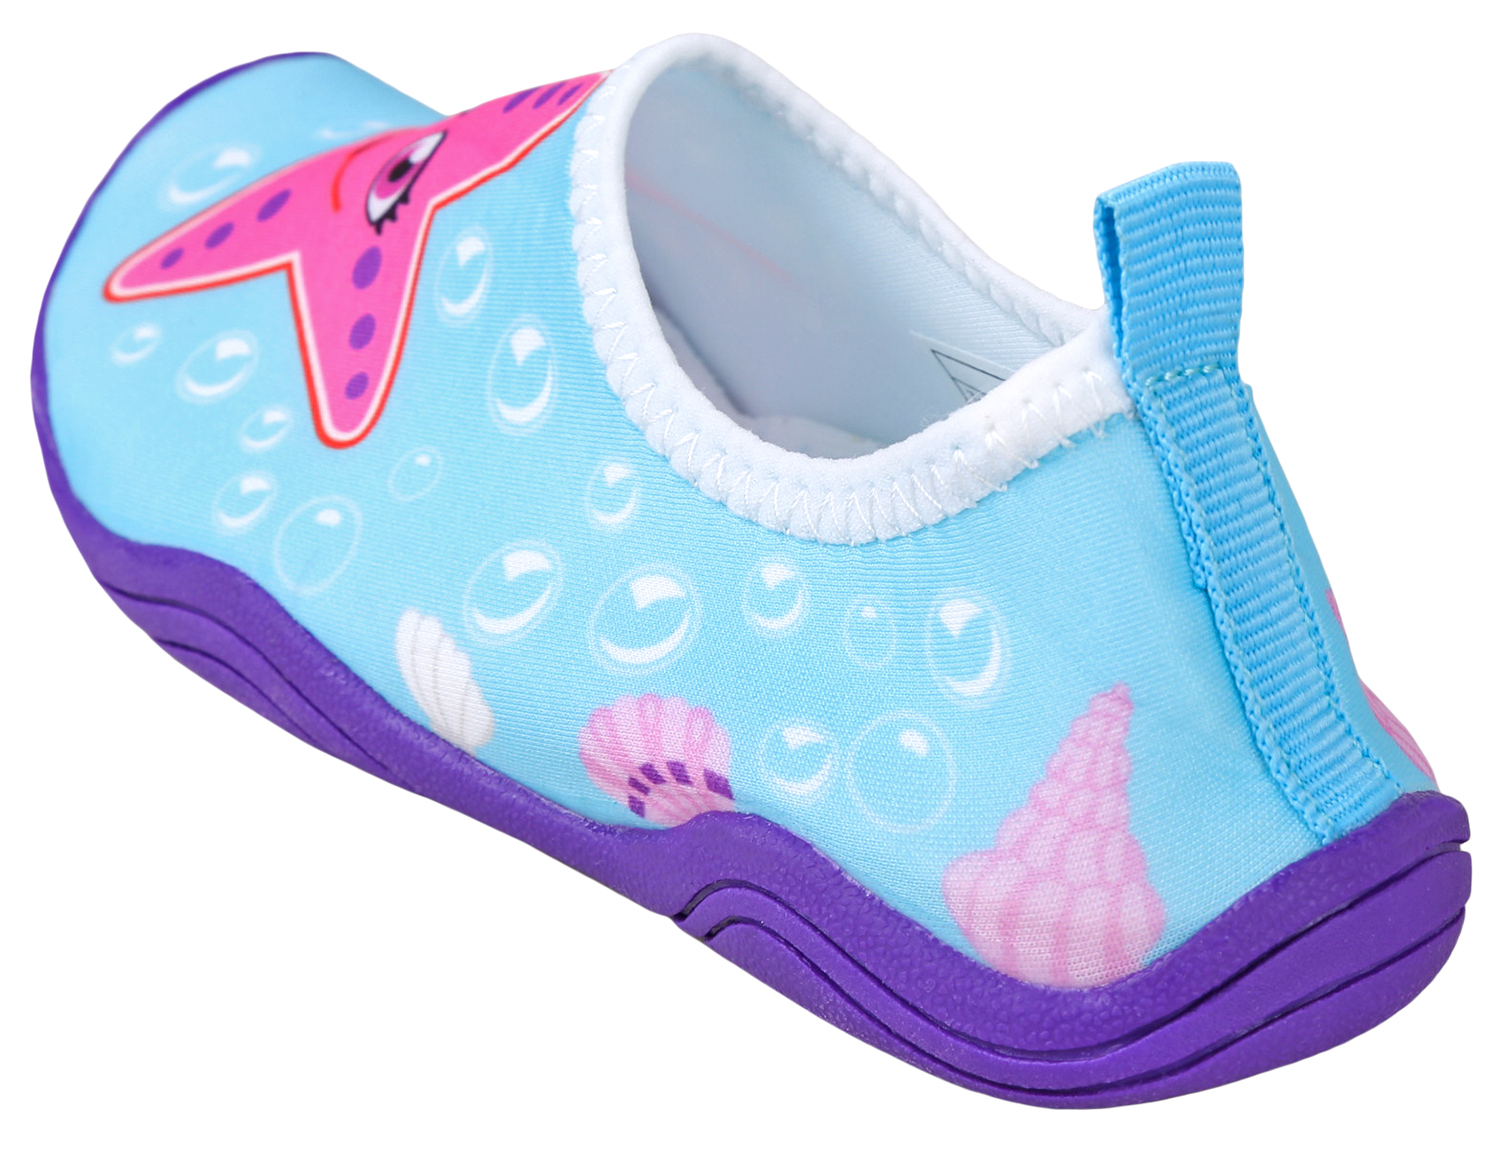 Lil' Fins Kids Water Shoes - Beach Shoes | Summer Fun | 3D Toddler Water Shoes Kids | Quick Dry | Swim Shoes Starfish 6/7 M US - image 4 of 5